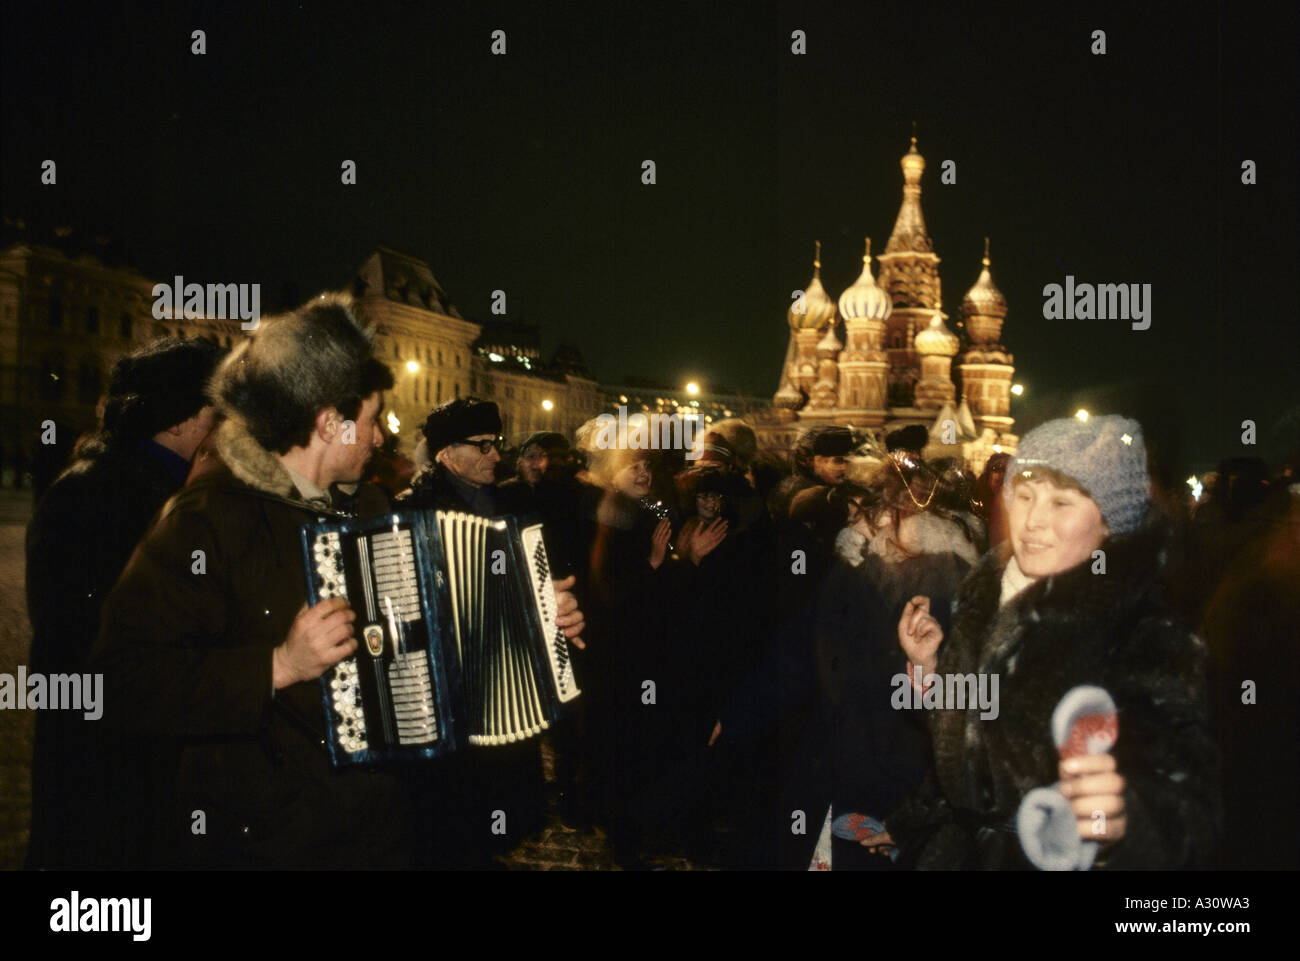 Moscou Saint-Pétersbourg man playing accordion amogst la foule celebrating new year s day place rouge Moscou Banque D'Images